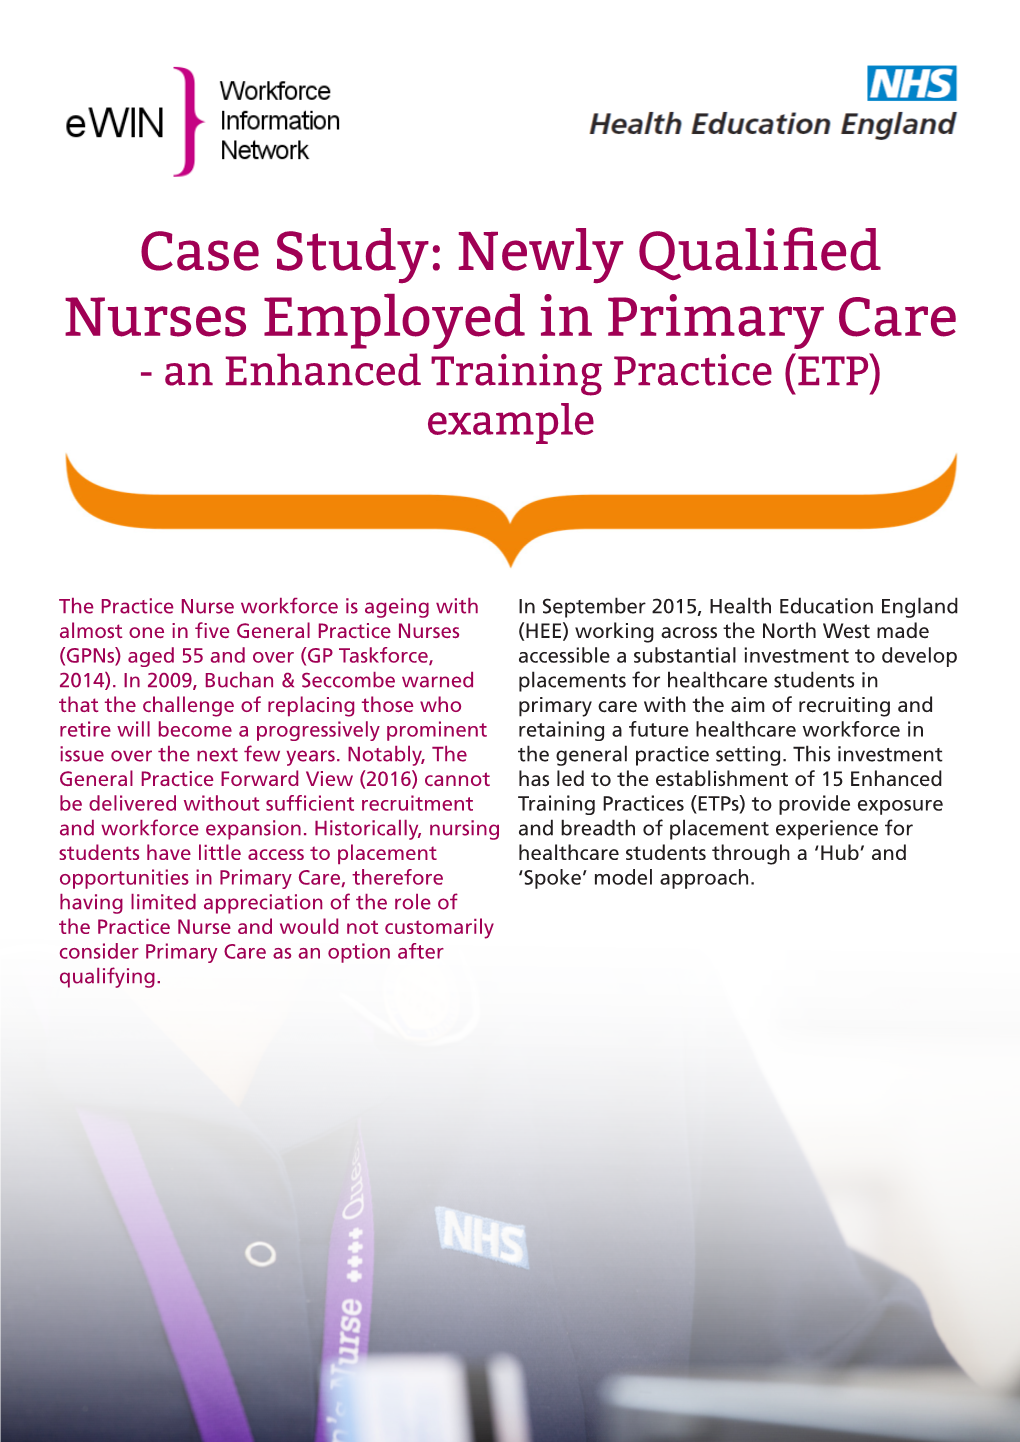 Case Study: Newly Qualified Nurses Employed in Primary Care - an Enhanced Training Practice (ETP) Example